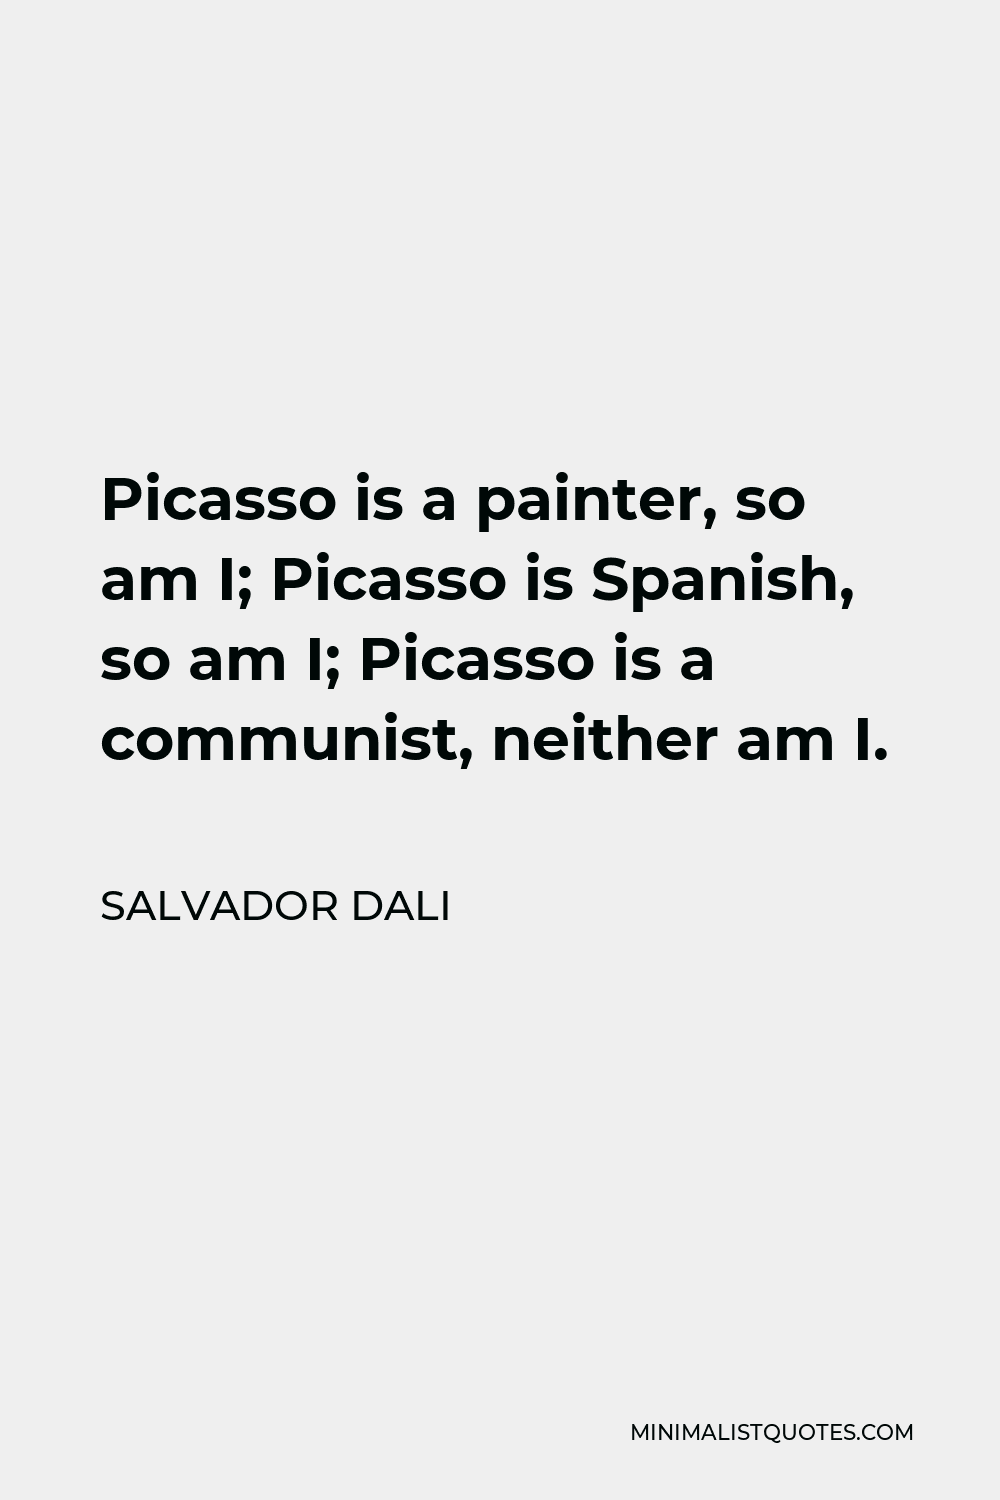 Salvador Dali Quote - Picasso is a painter, so am I; Picasso is Spanish, so am I; Picasso is a communist, neither am I.